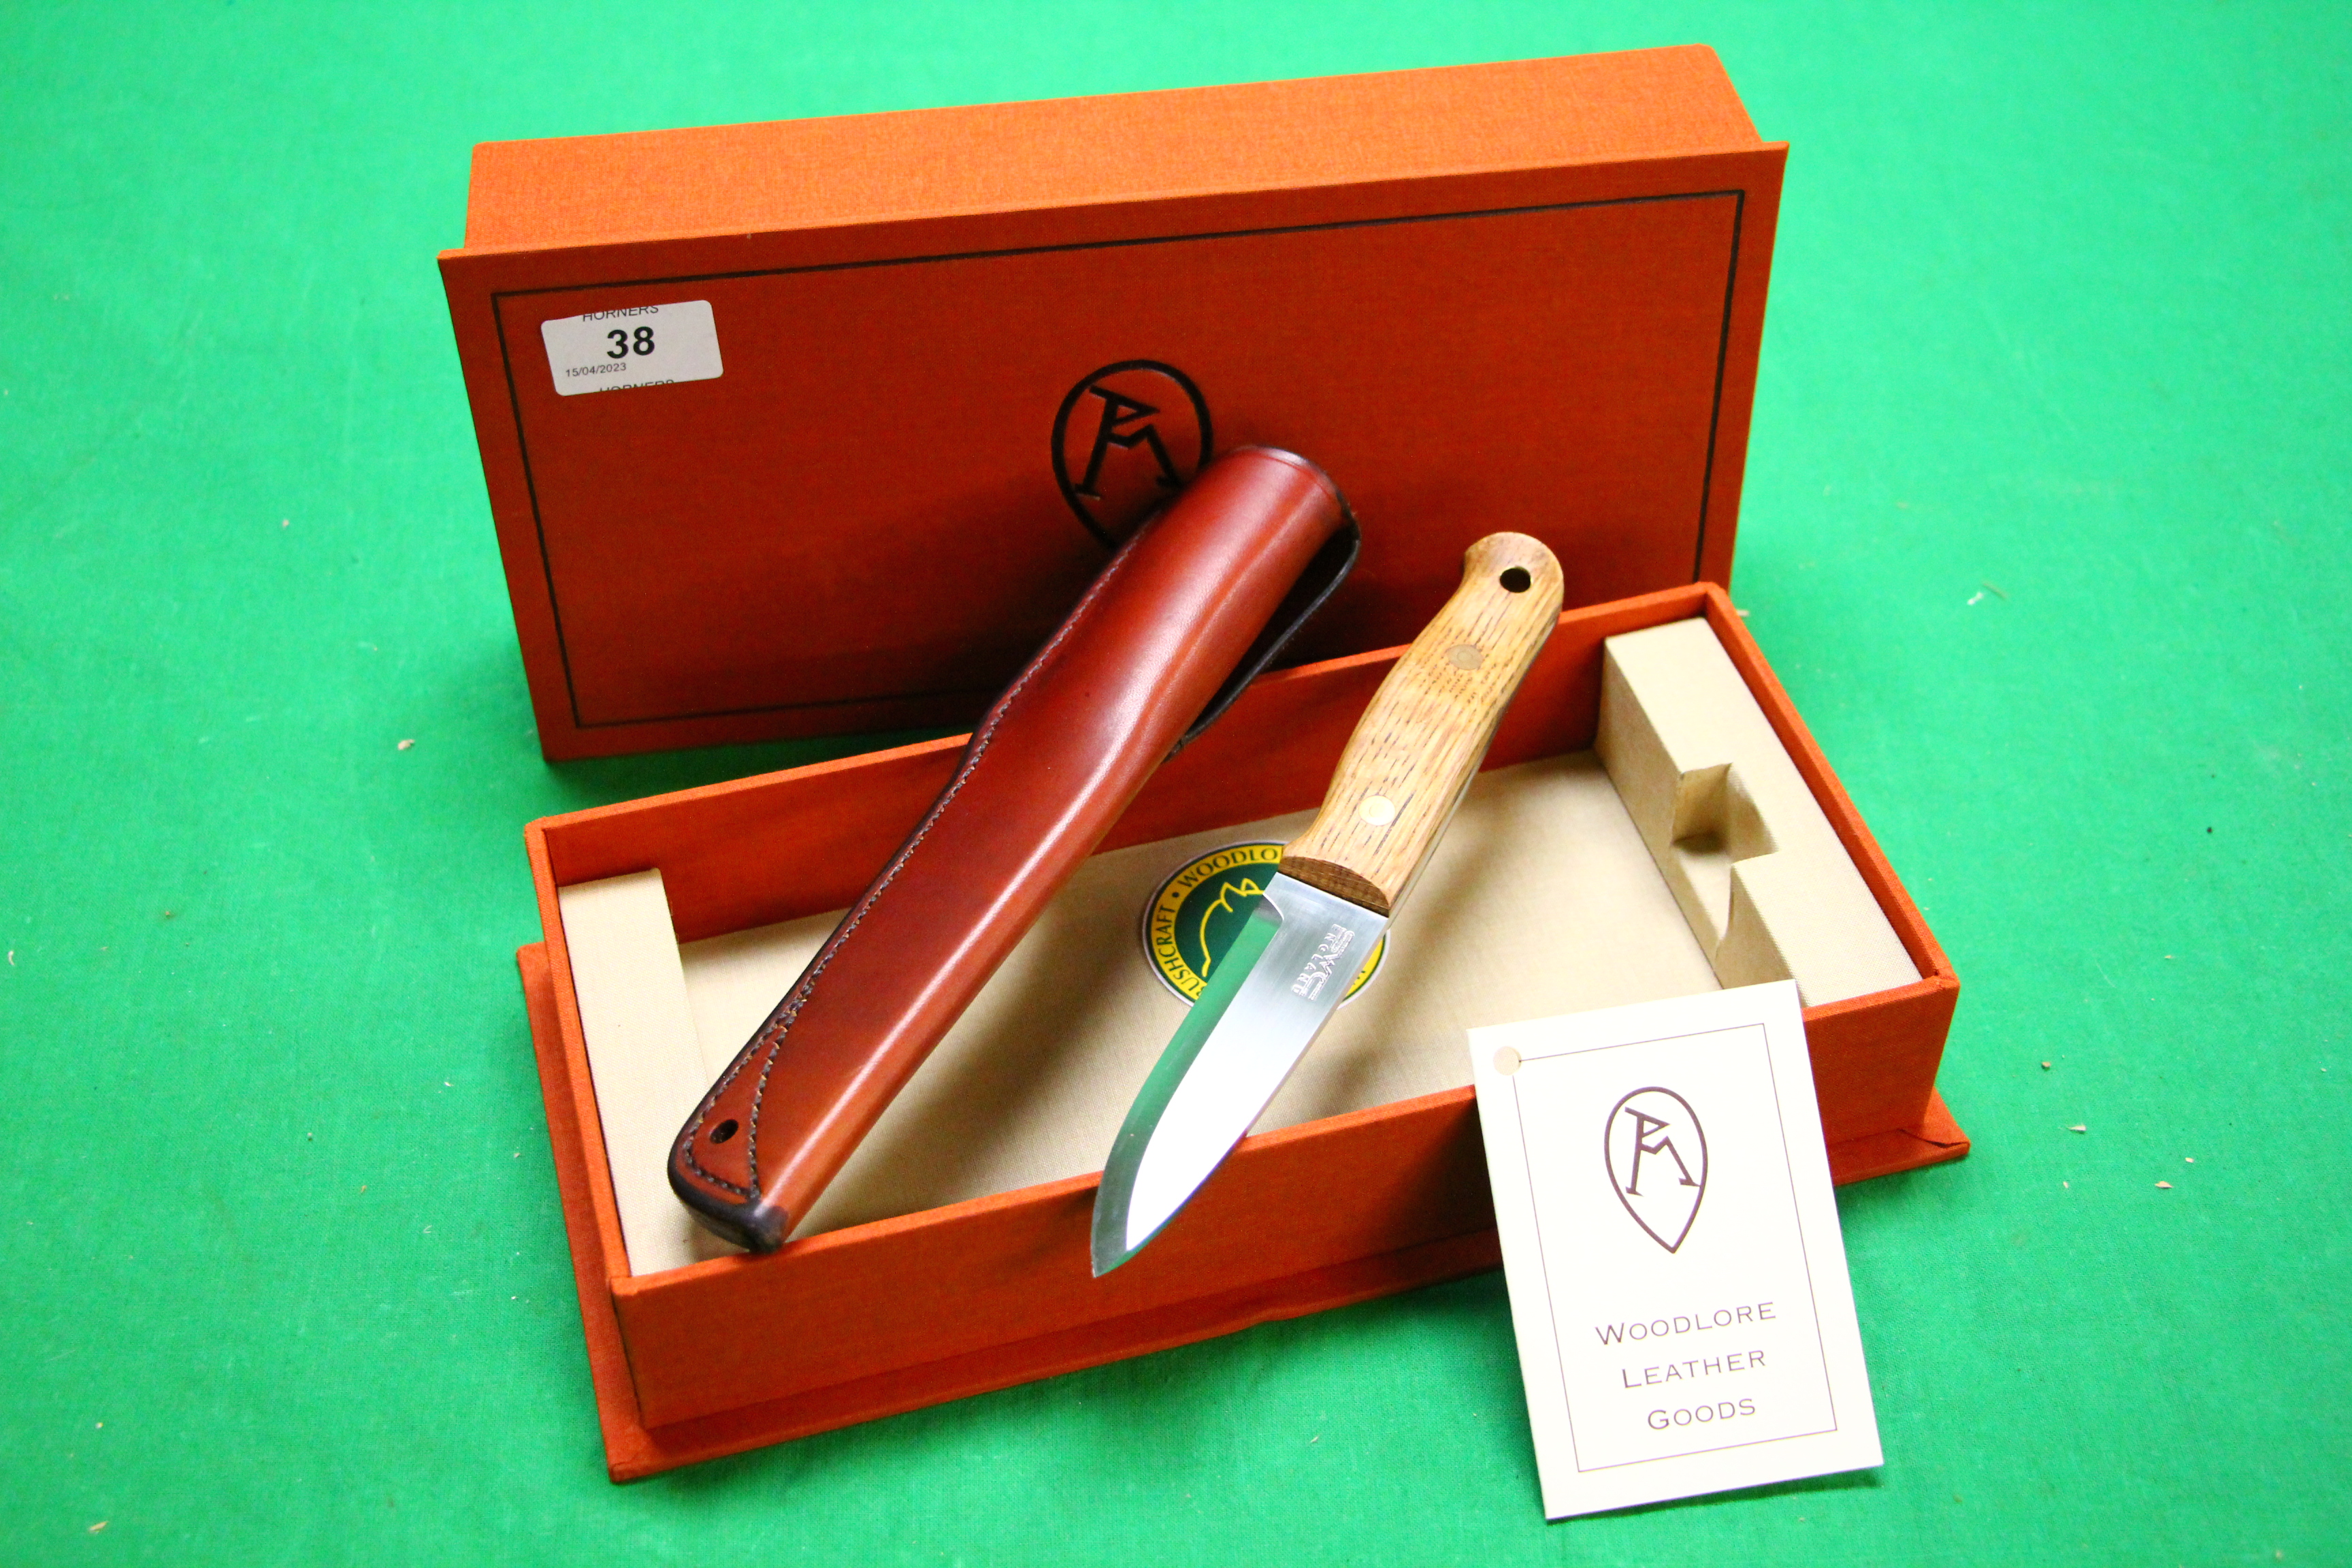 A RAY MEARS BUSHCRAFT KNIFE IN LEATHER SHEATH COMPLETE WITH ORIGINAL PRESENTATION BOX AND